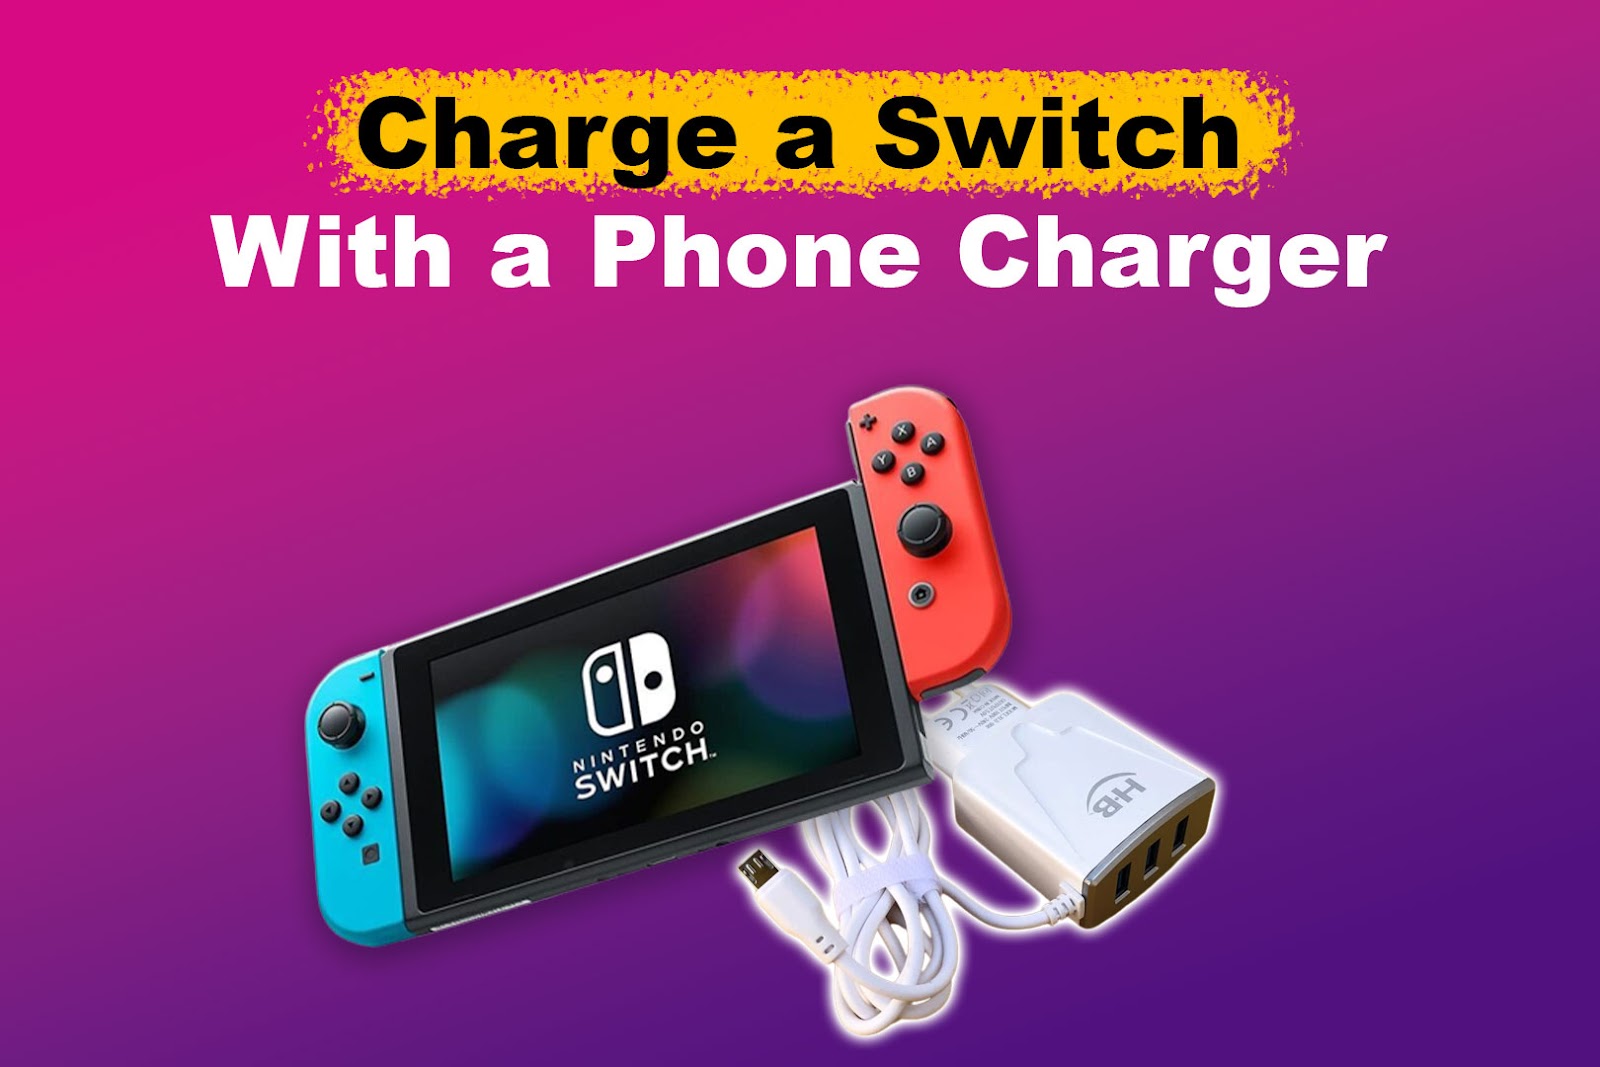 Can You Charge a Switch With a Phone Charger